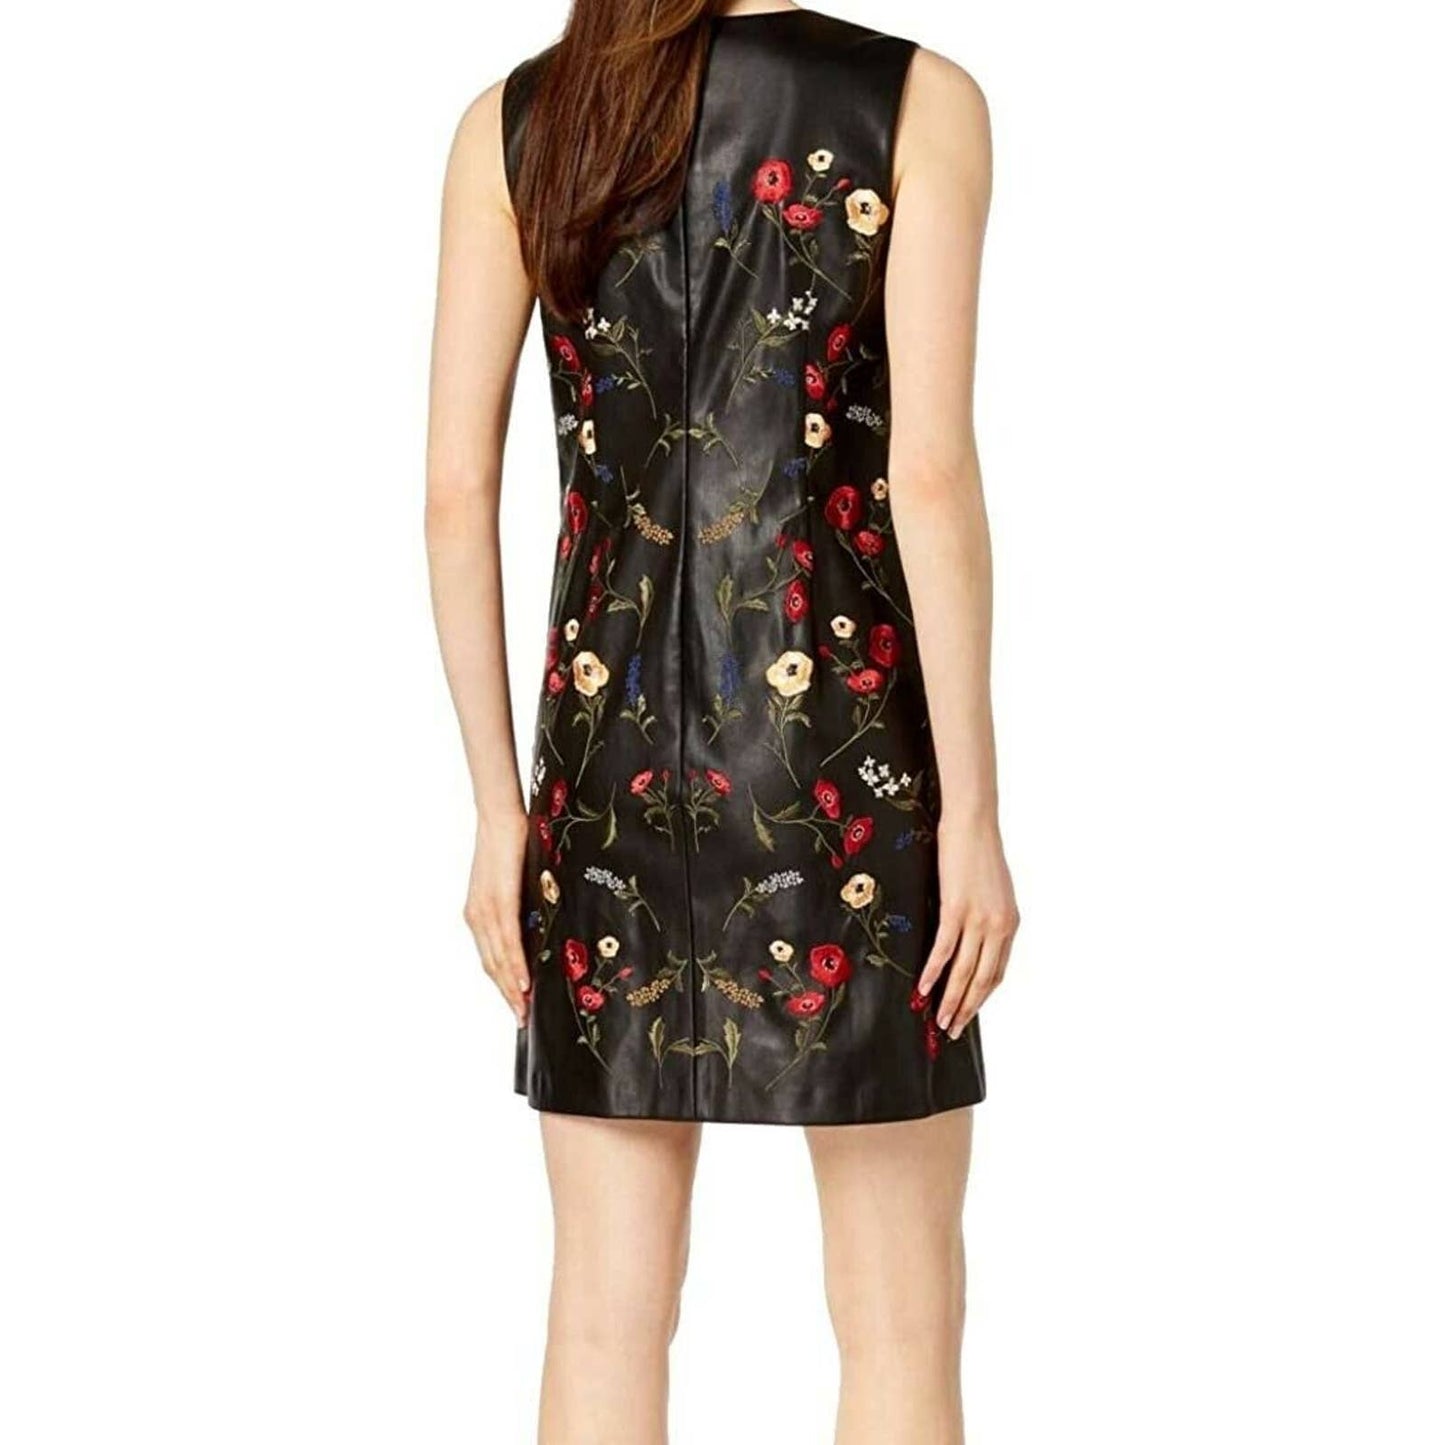 CALVIN KLEIN LADIES FAUX LEATHER EMBROIDERED SHIFT DRESS, 6, NWT $189